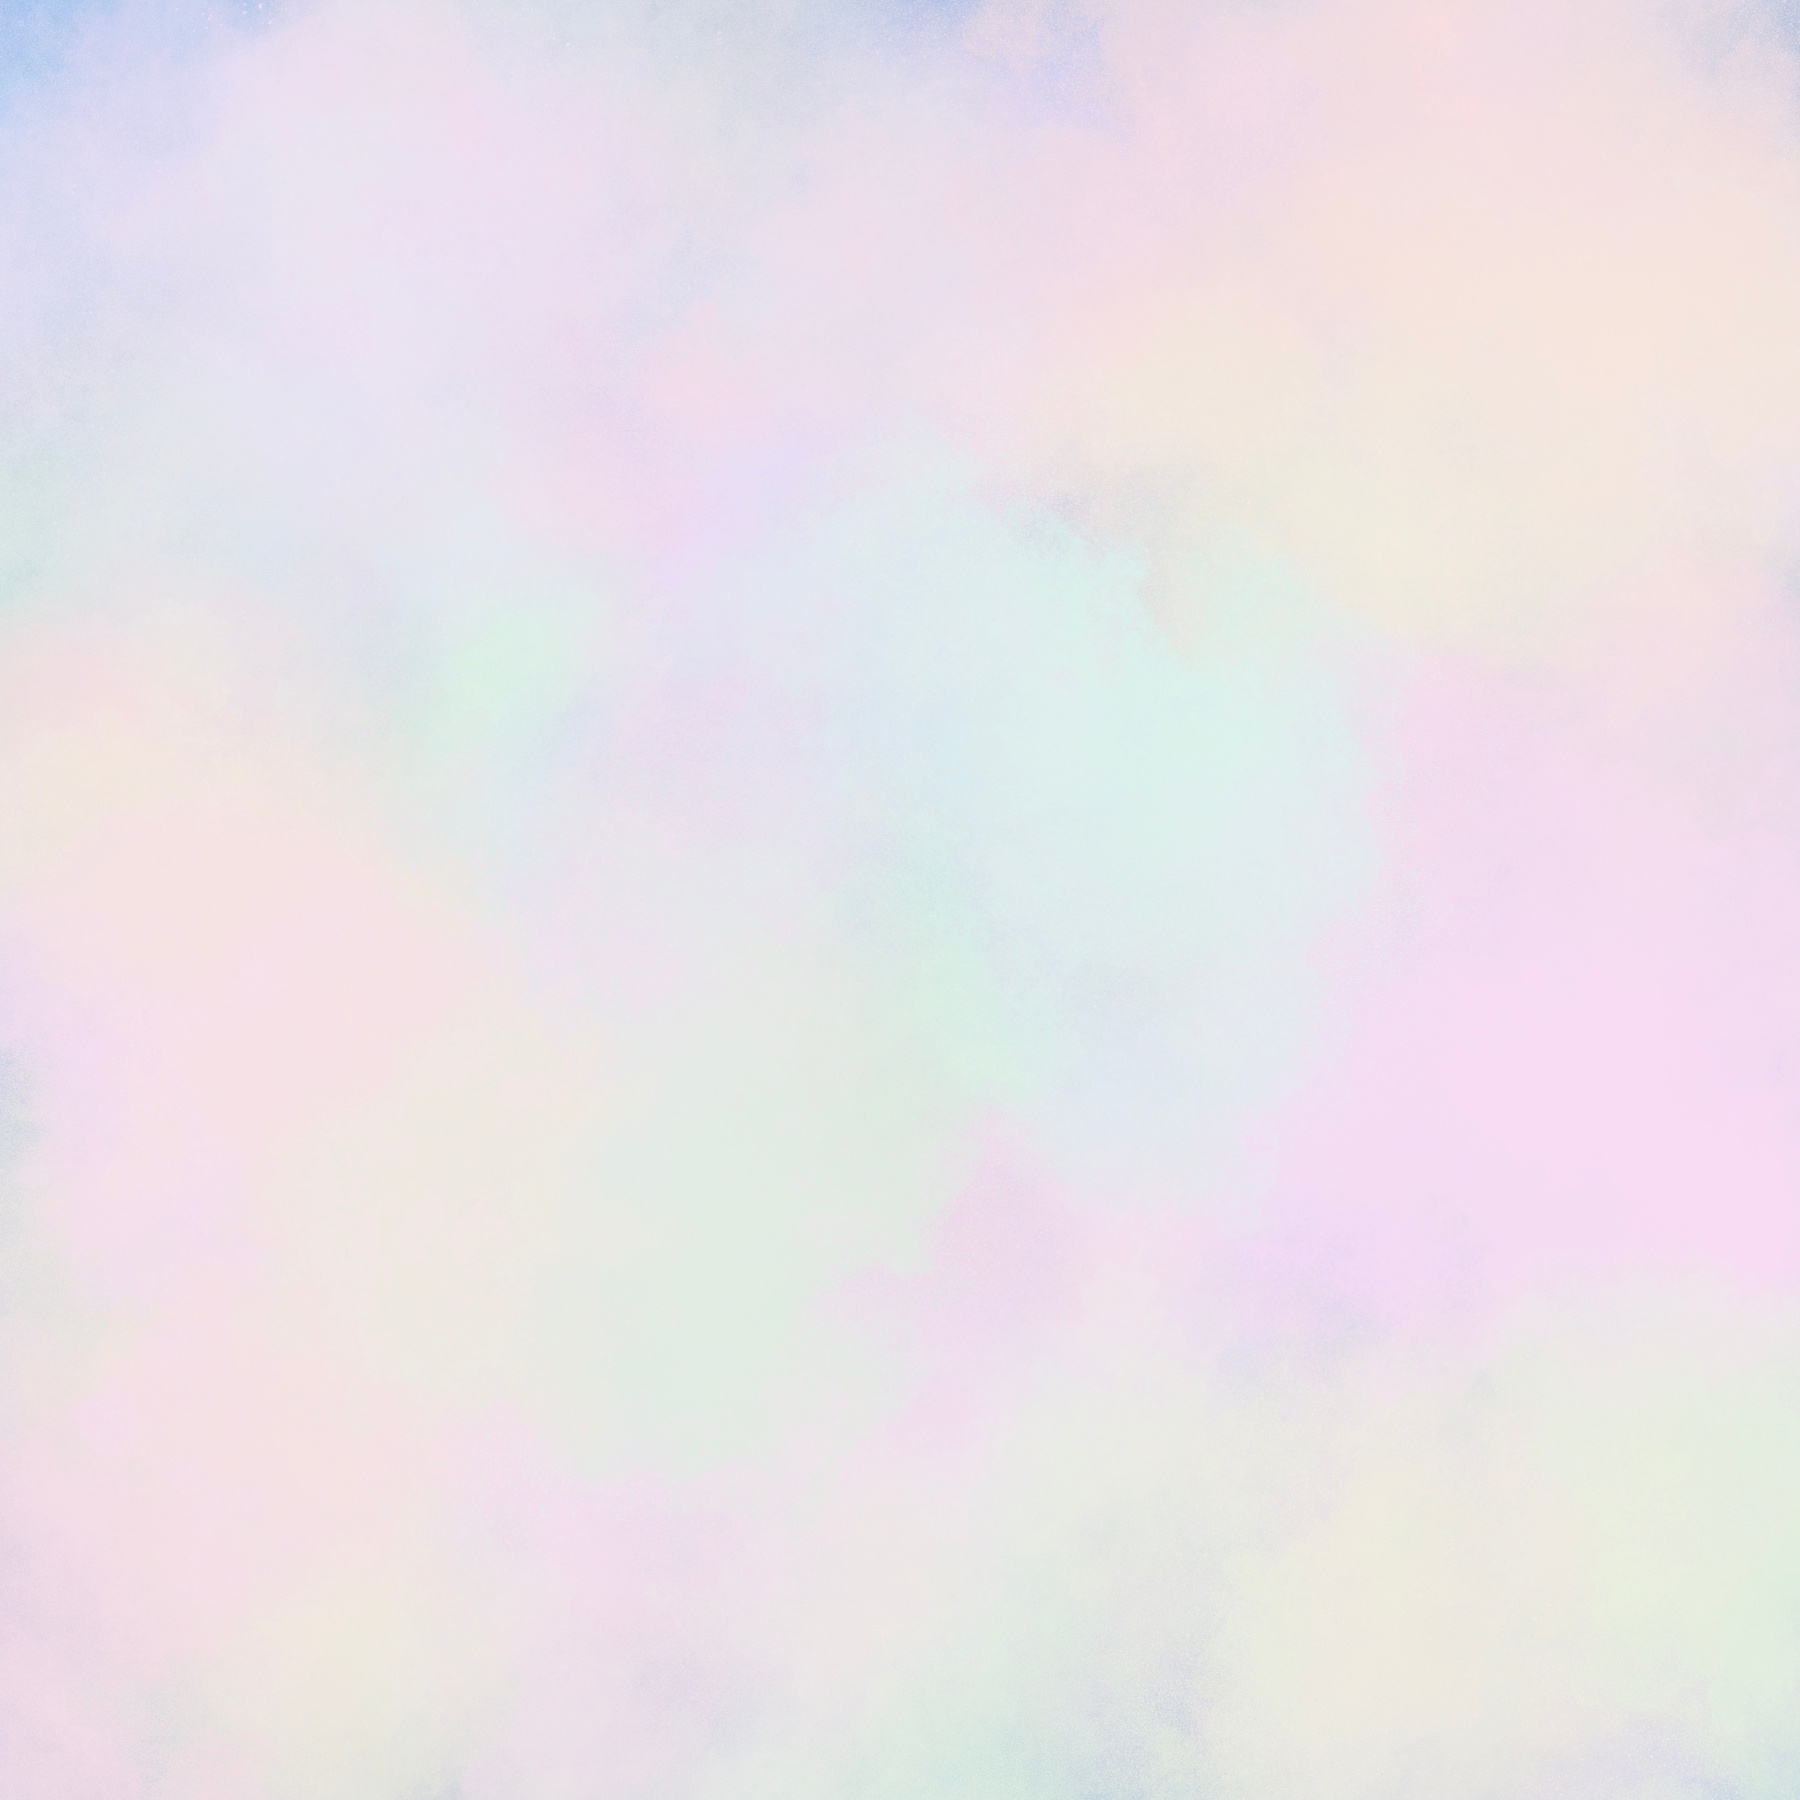 Pastel Watercolor Stains Background 